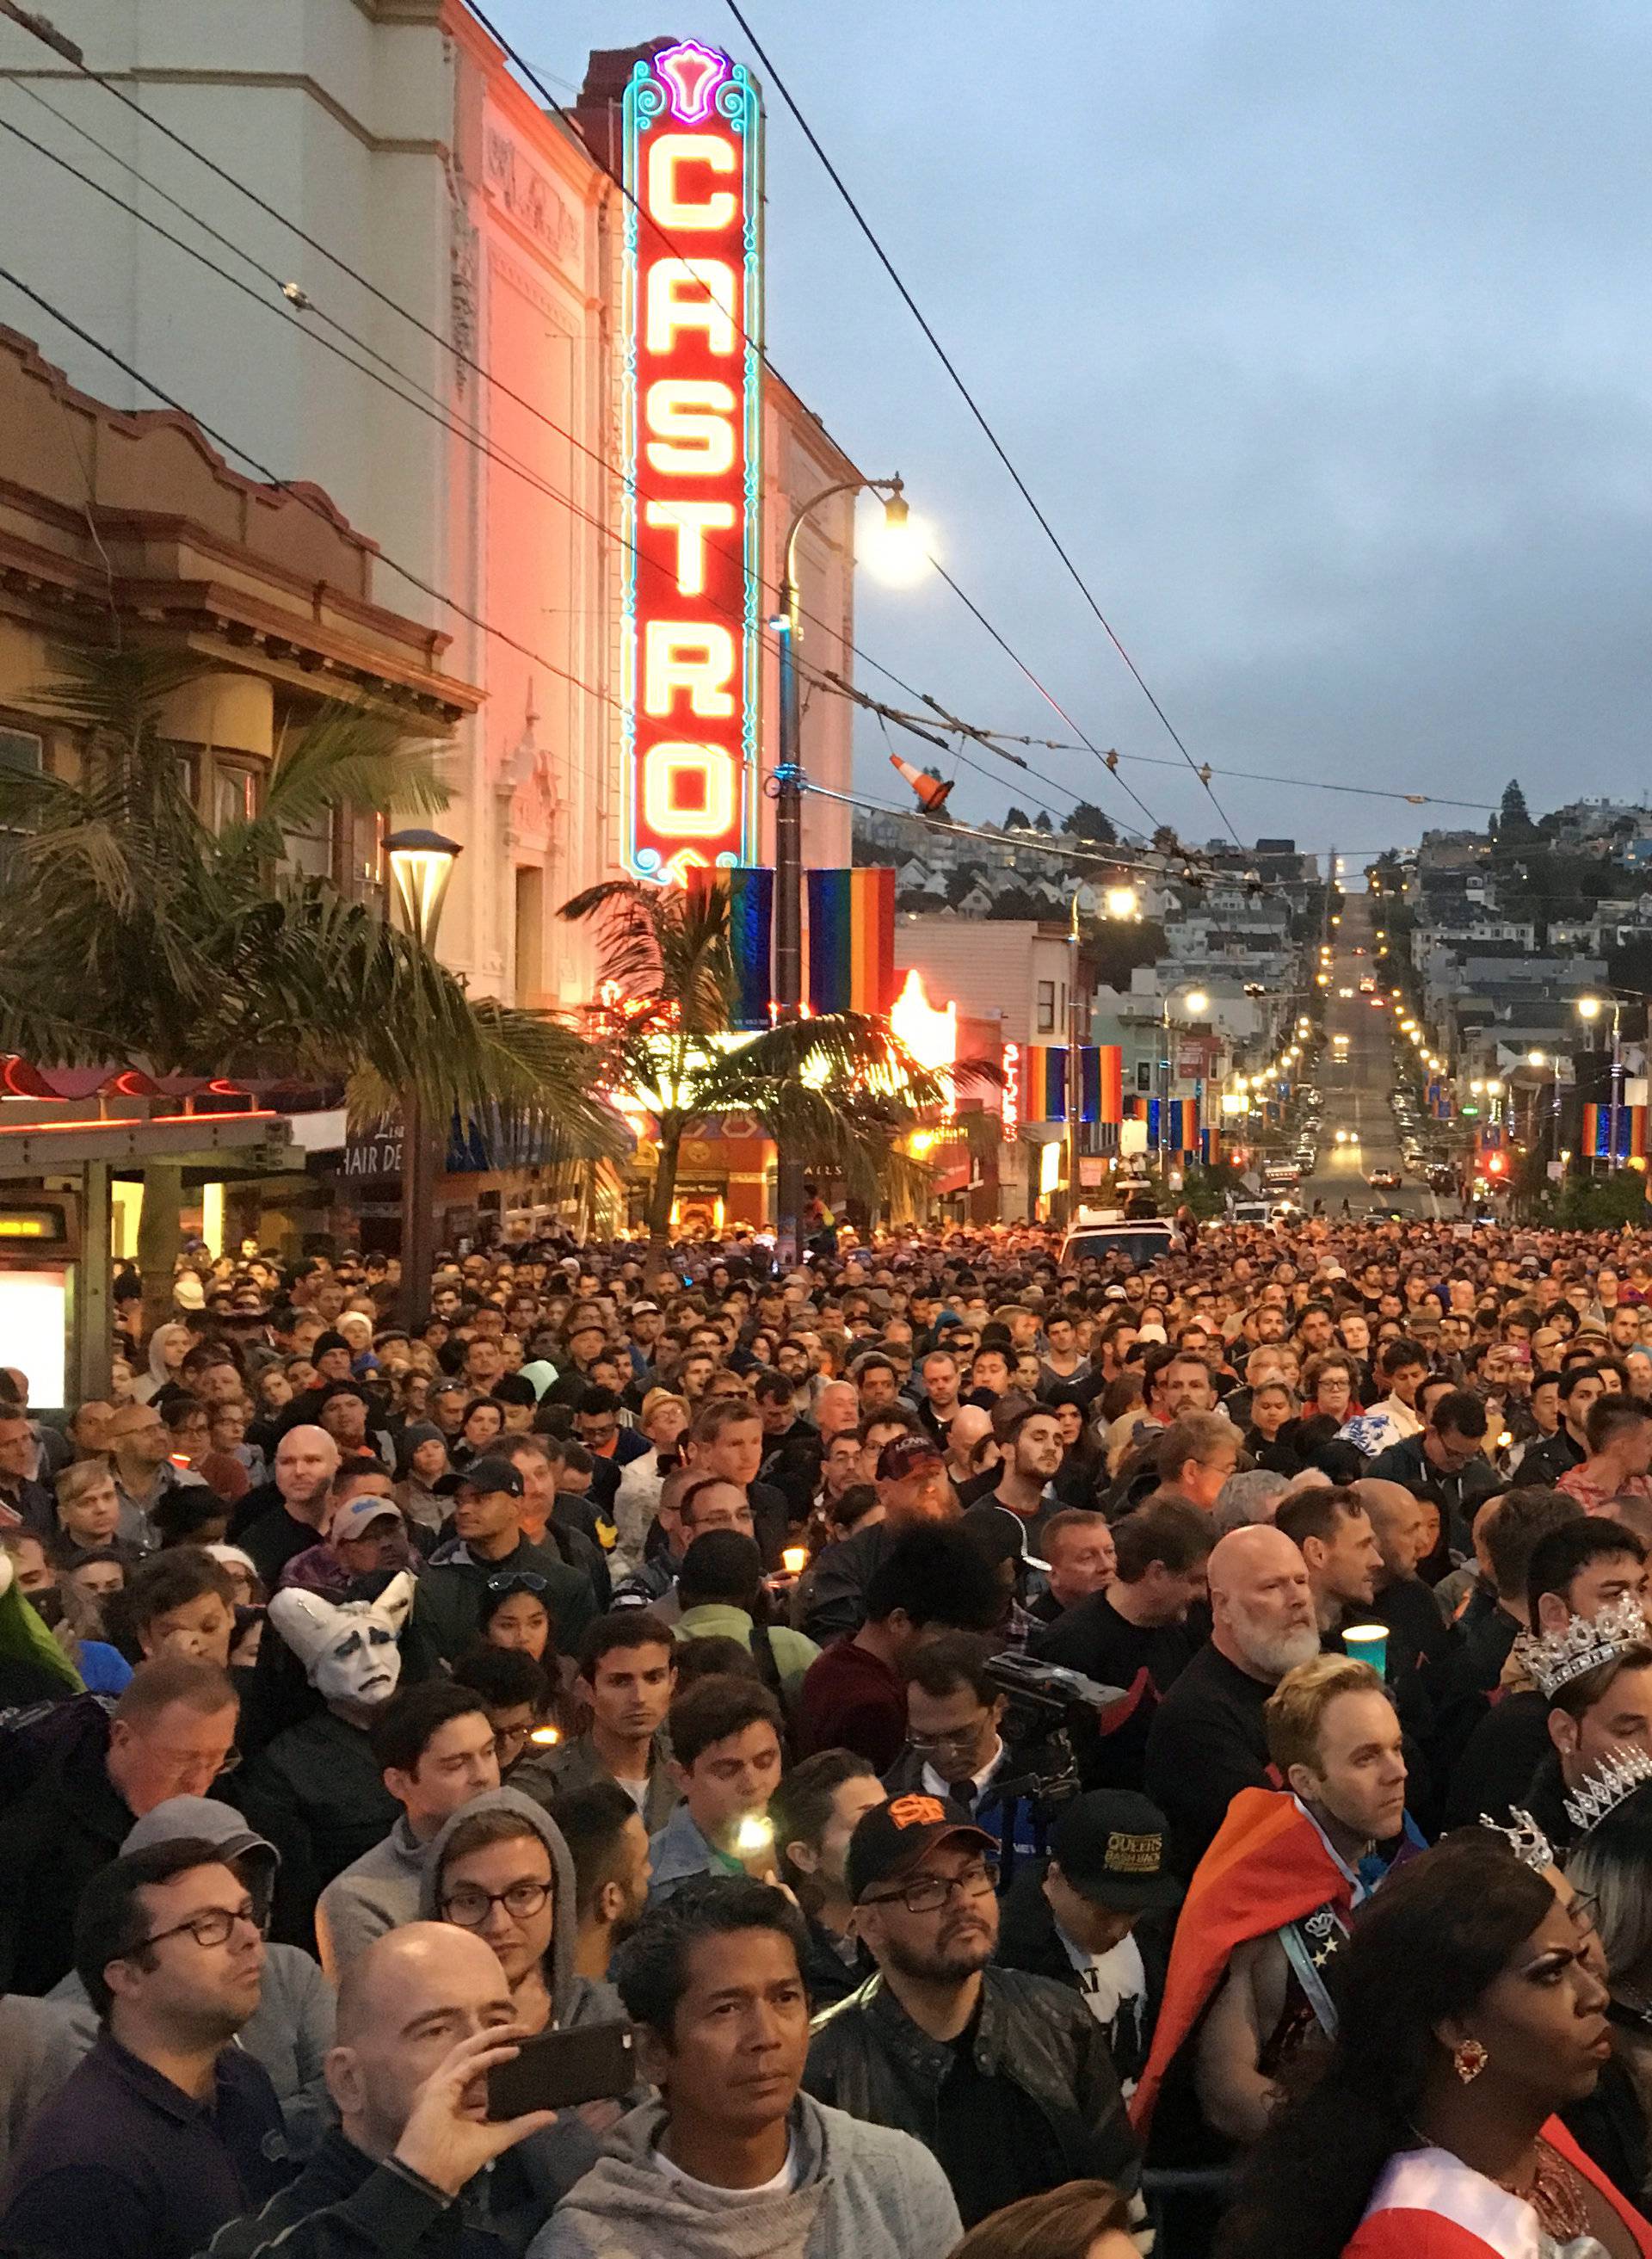 People gather in the Castro District for a vigil for the victims of the Orlando shooting at a gay nightclub, in San Francisco